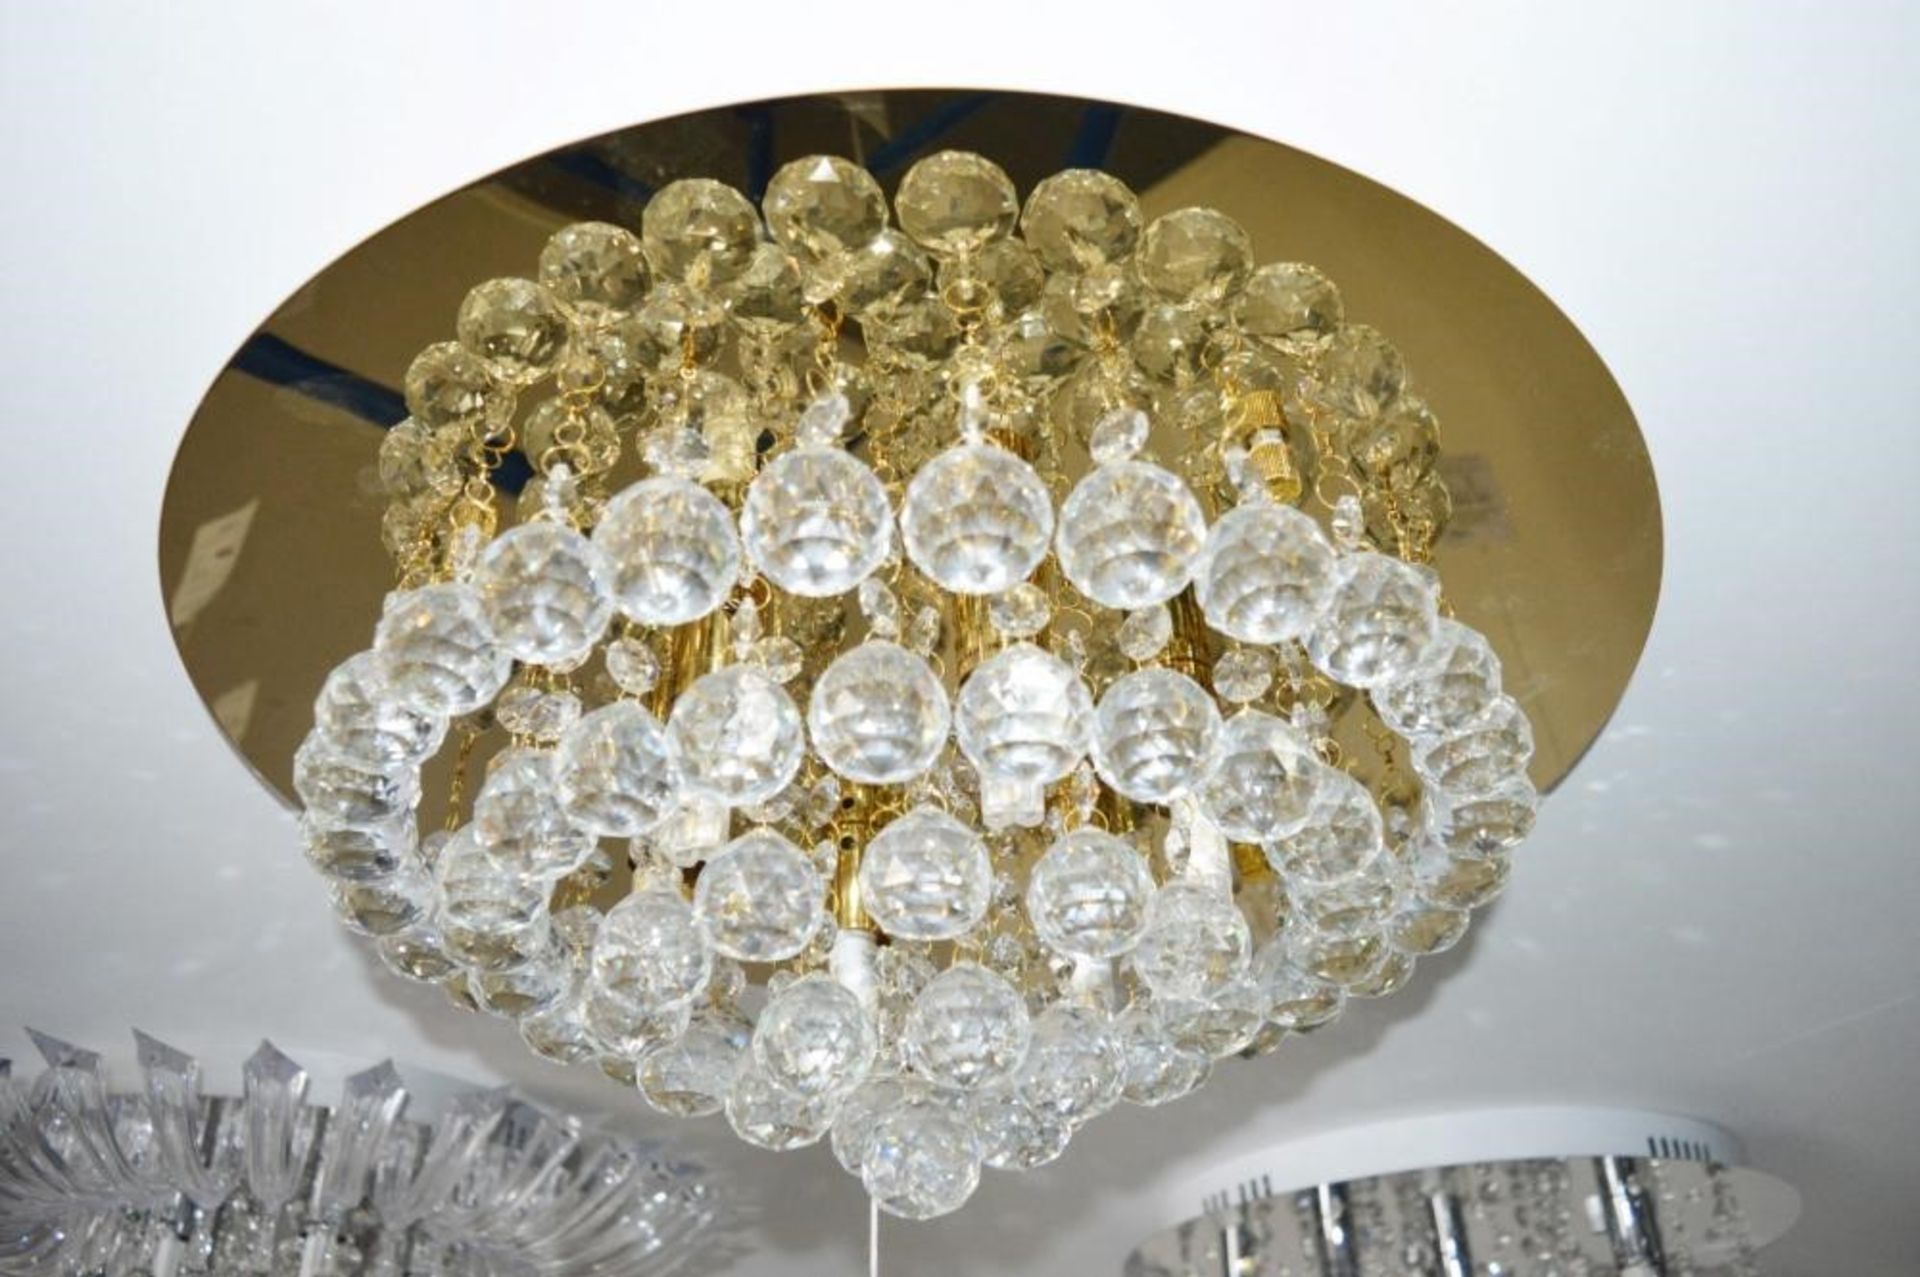 1 x Hanna Gold 6 Light Semi-flush With Clear Crystal Balls Fitting - Ex Display Stock - CL298 - Ref - Image 2 of 4